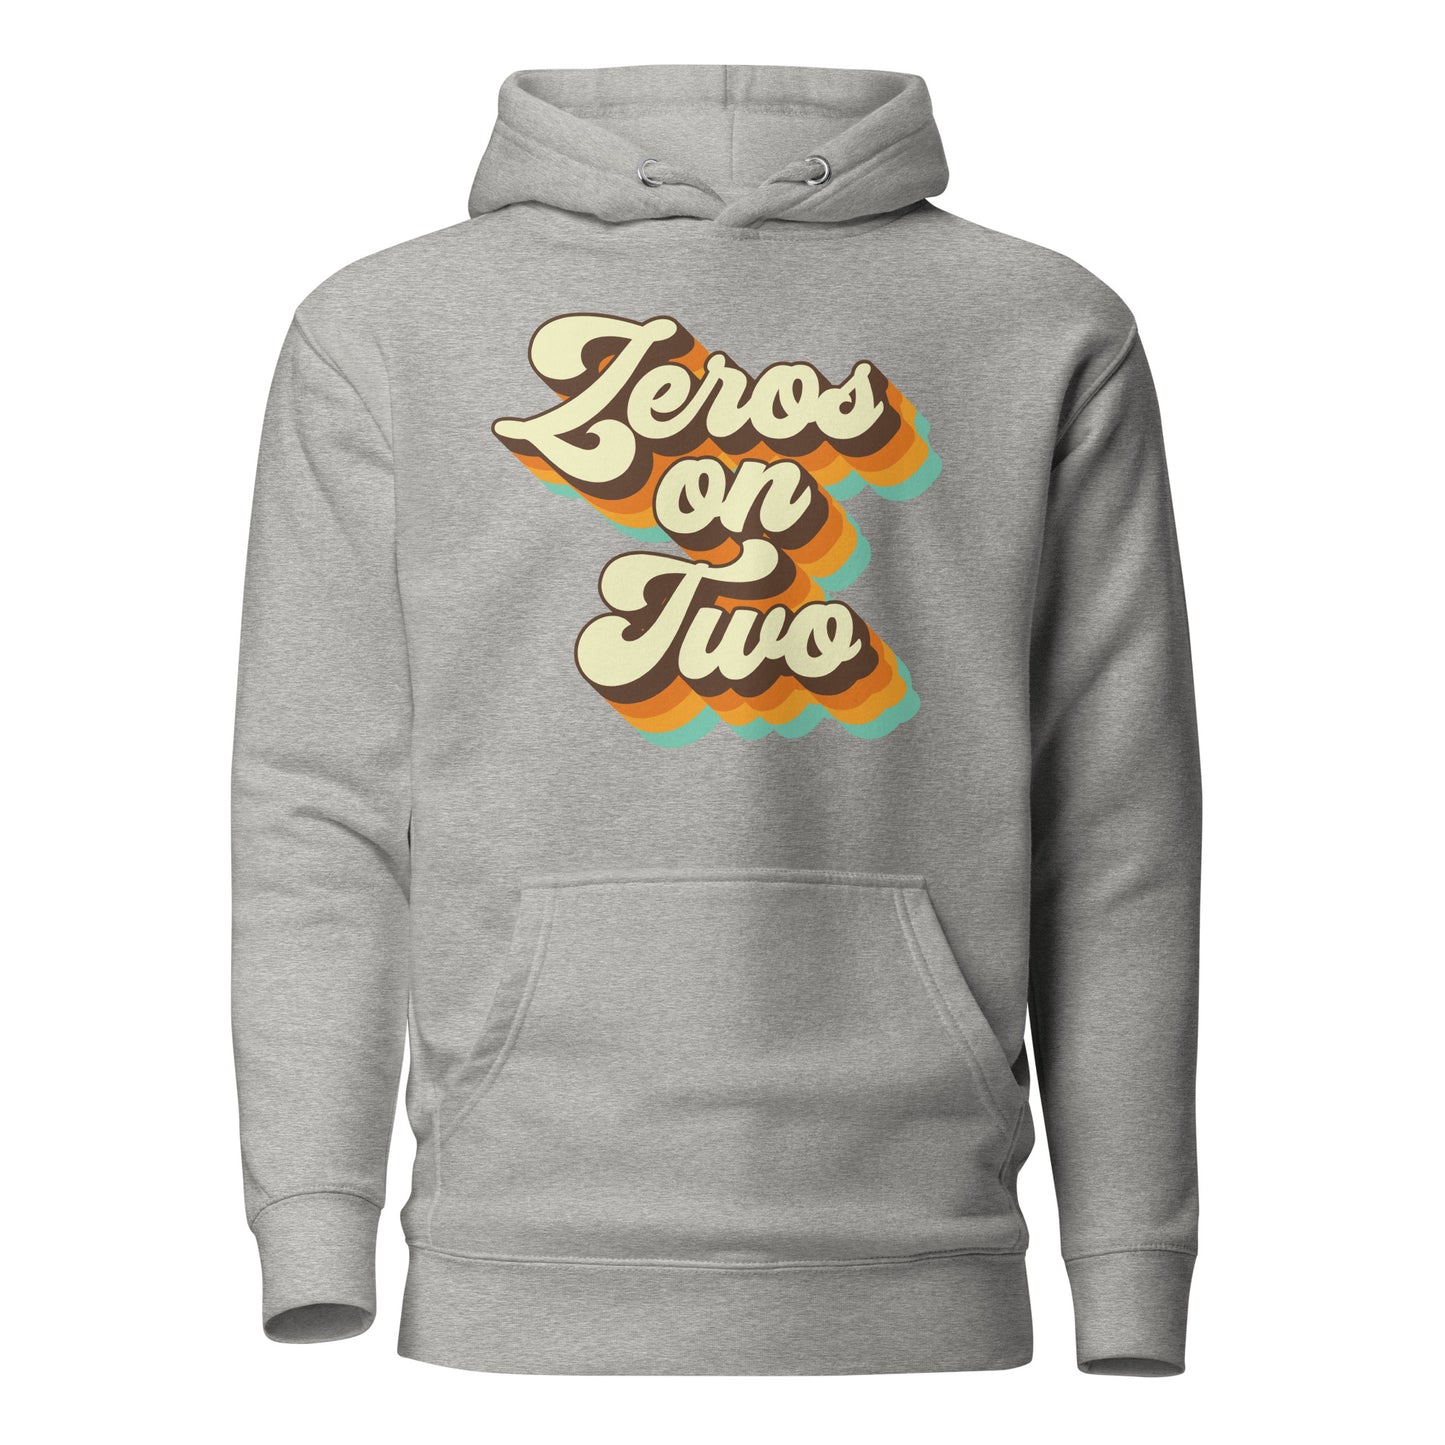 ZEROS ON TWO HOODIE